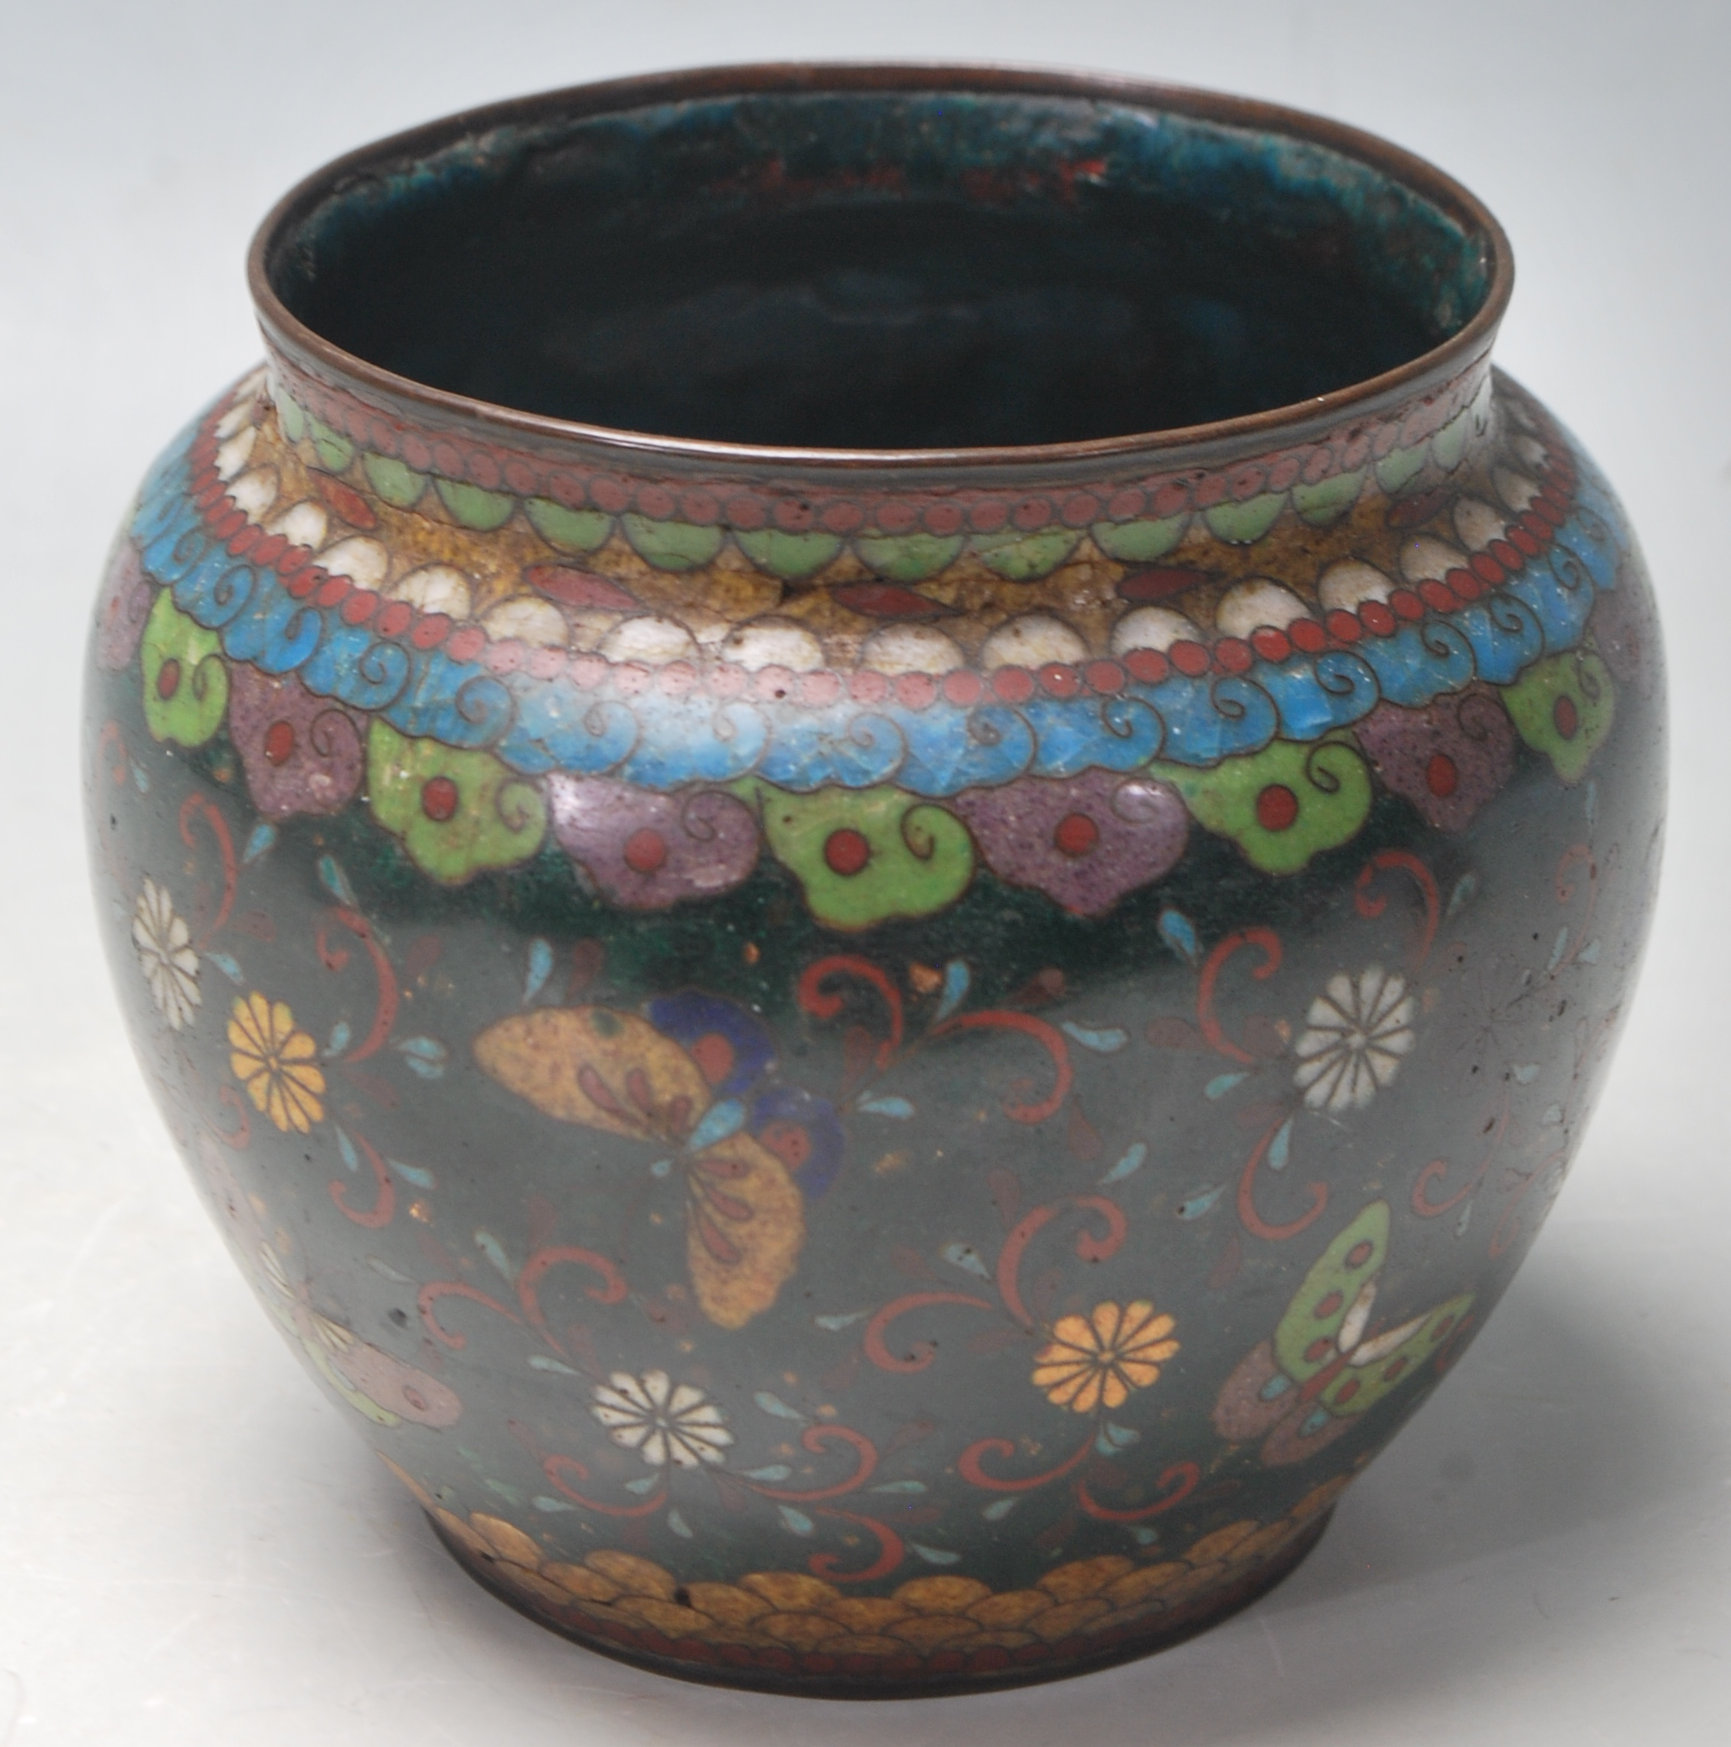 ANTIQUE CHINESE CLOISONNE BUTTERFLY VASE - Image 2 of 5